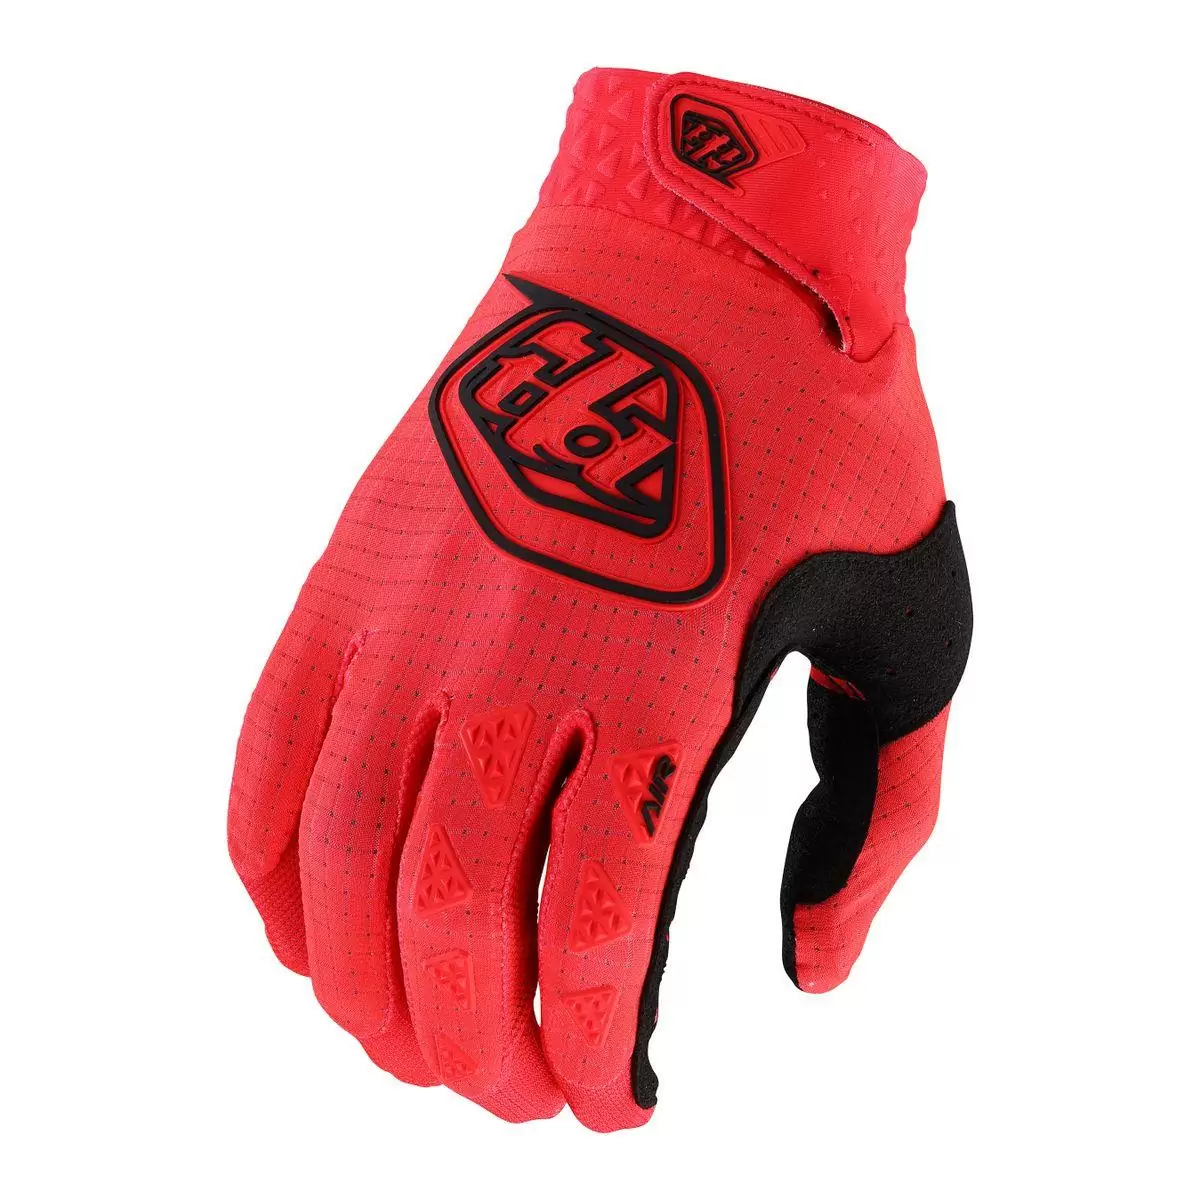 MTB Gloves Air Glove Red Fluo Size S #1